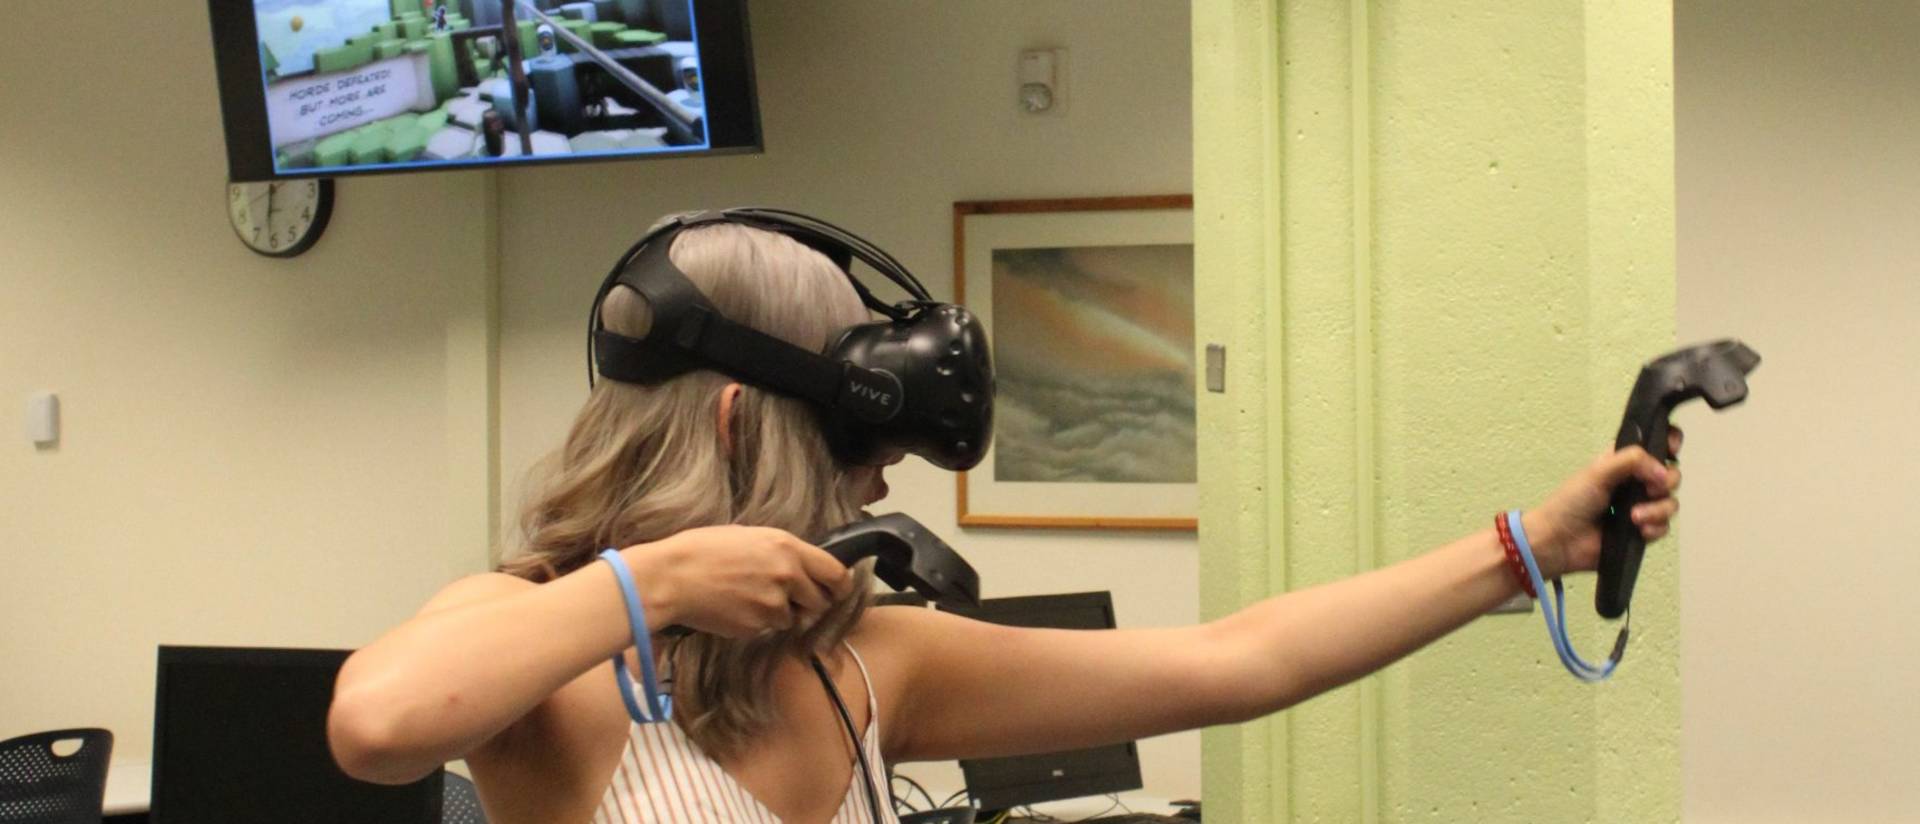 Student trying out Virtual reality goggles